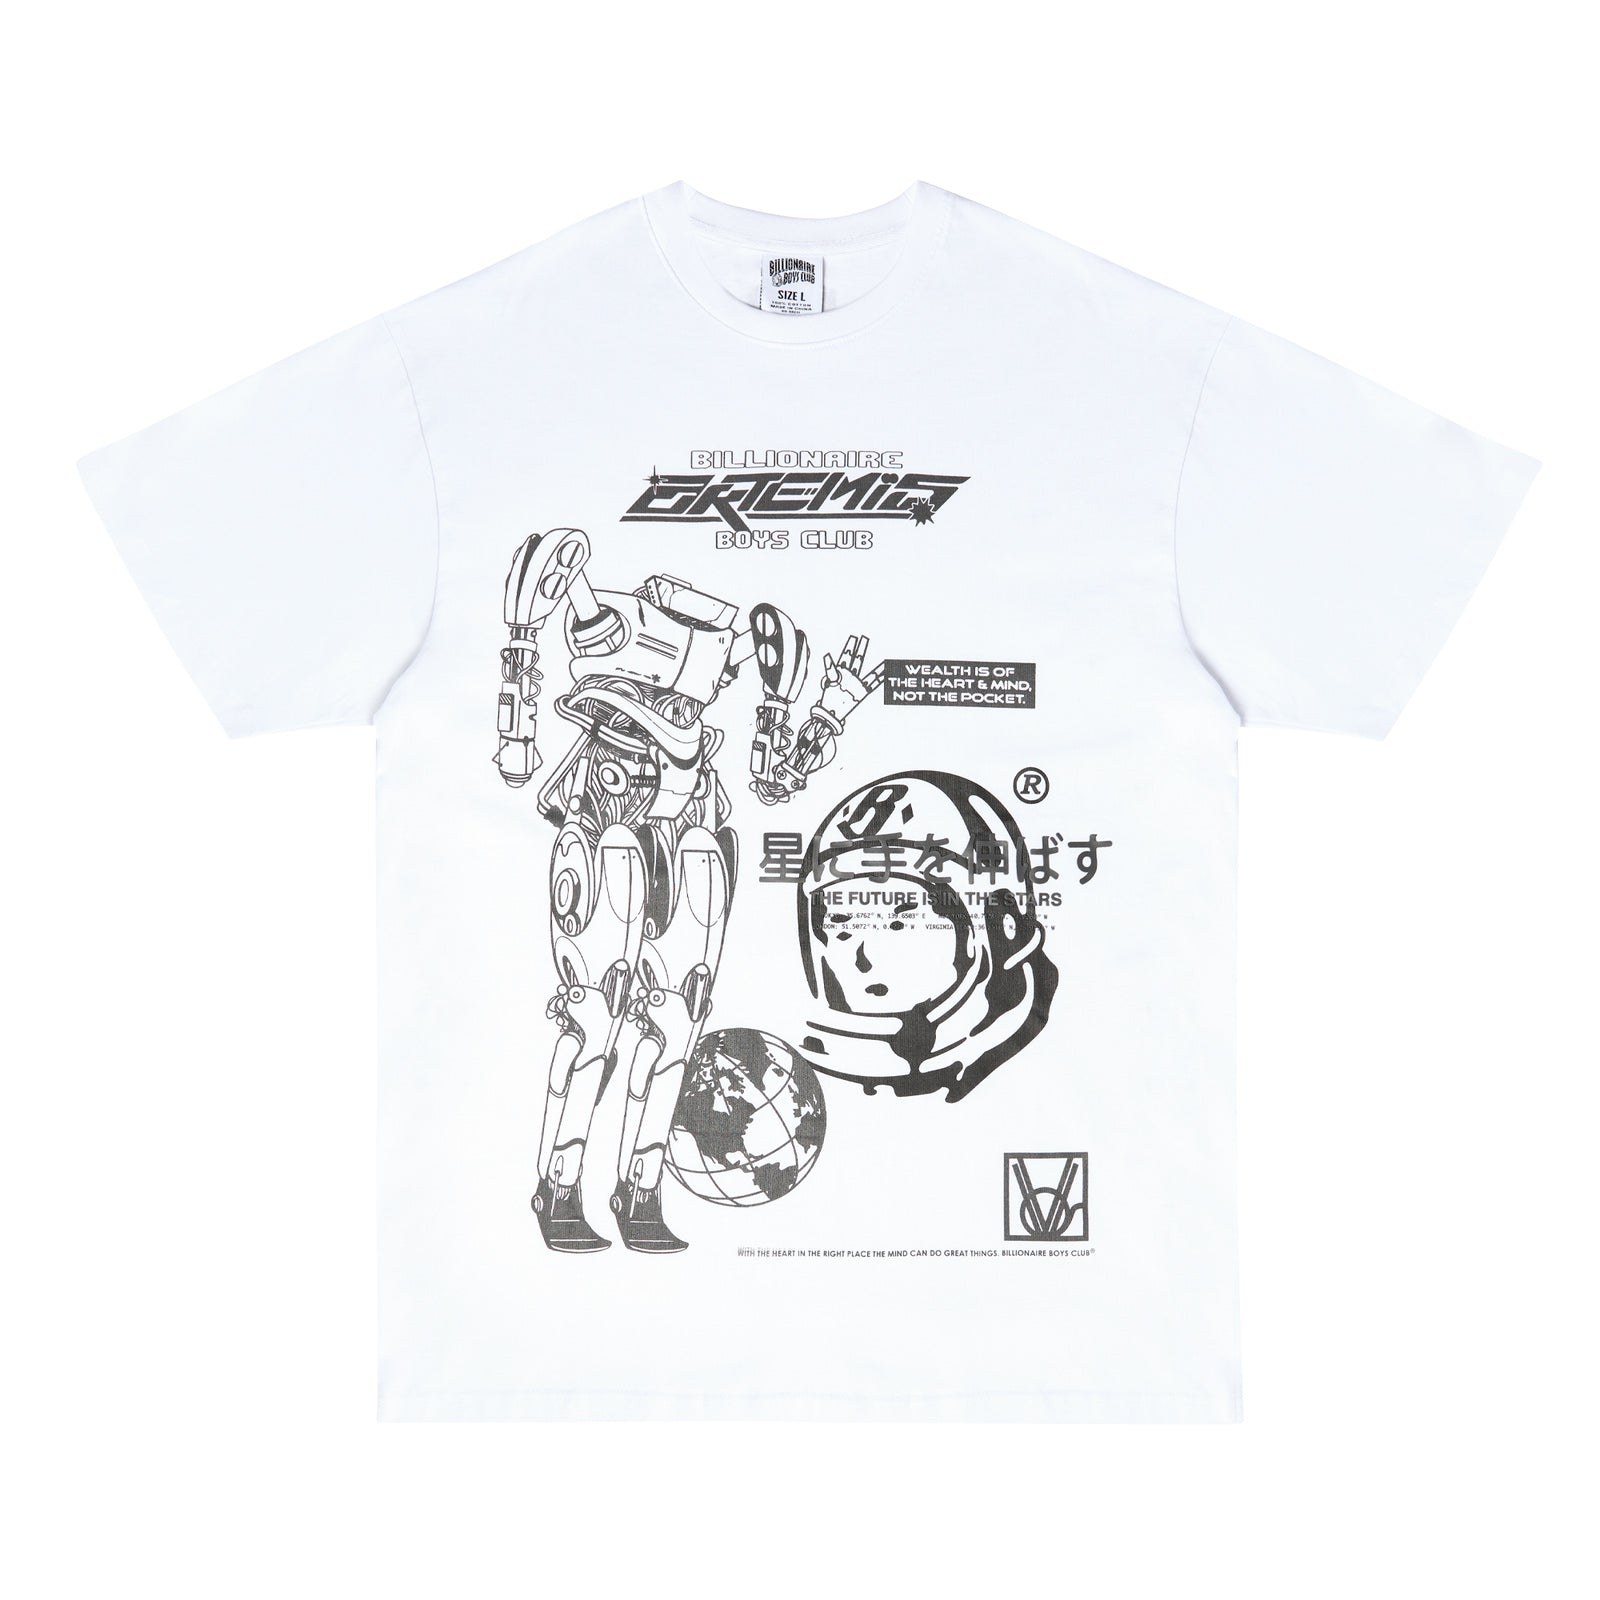 Casio Vintage Silver Red Blue MDV106DD-1A2 Men BB Peace SS Tee White (Oversized Fit) - T-SHIRTS Canada